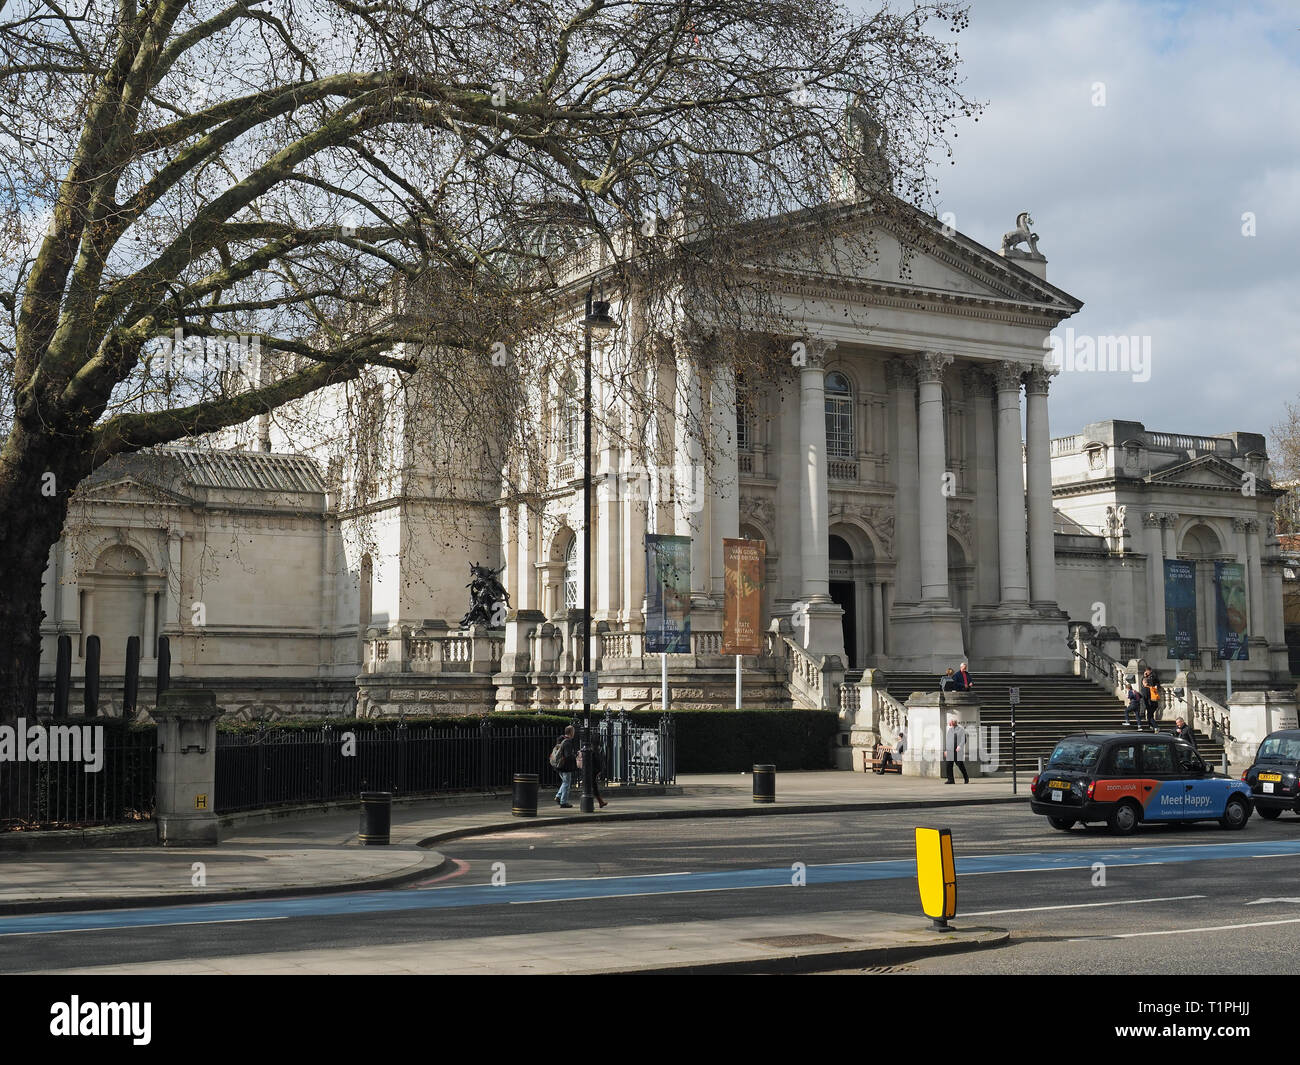 View of the Tate Britain art gallery on Millbank in London Stock Photo